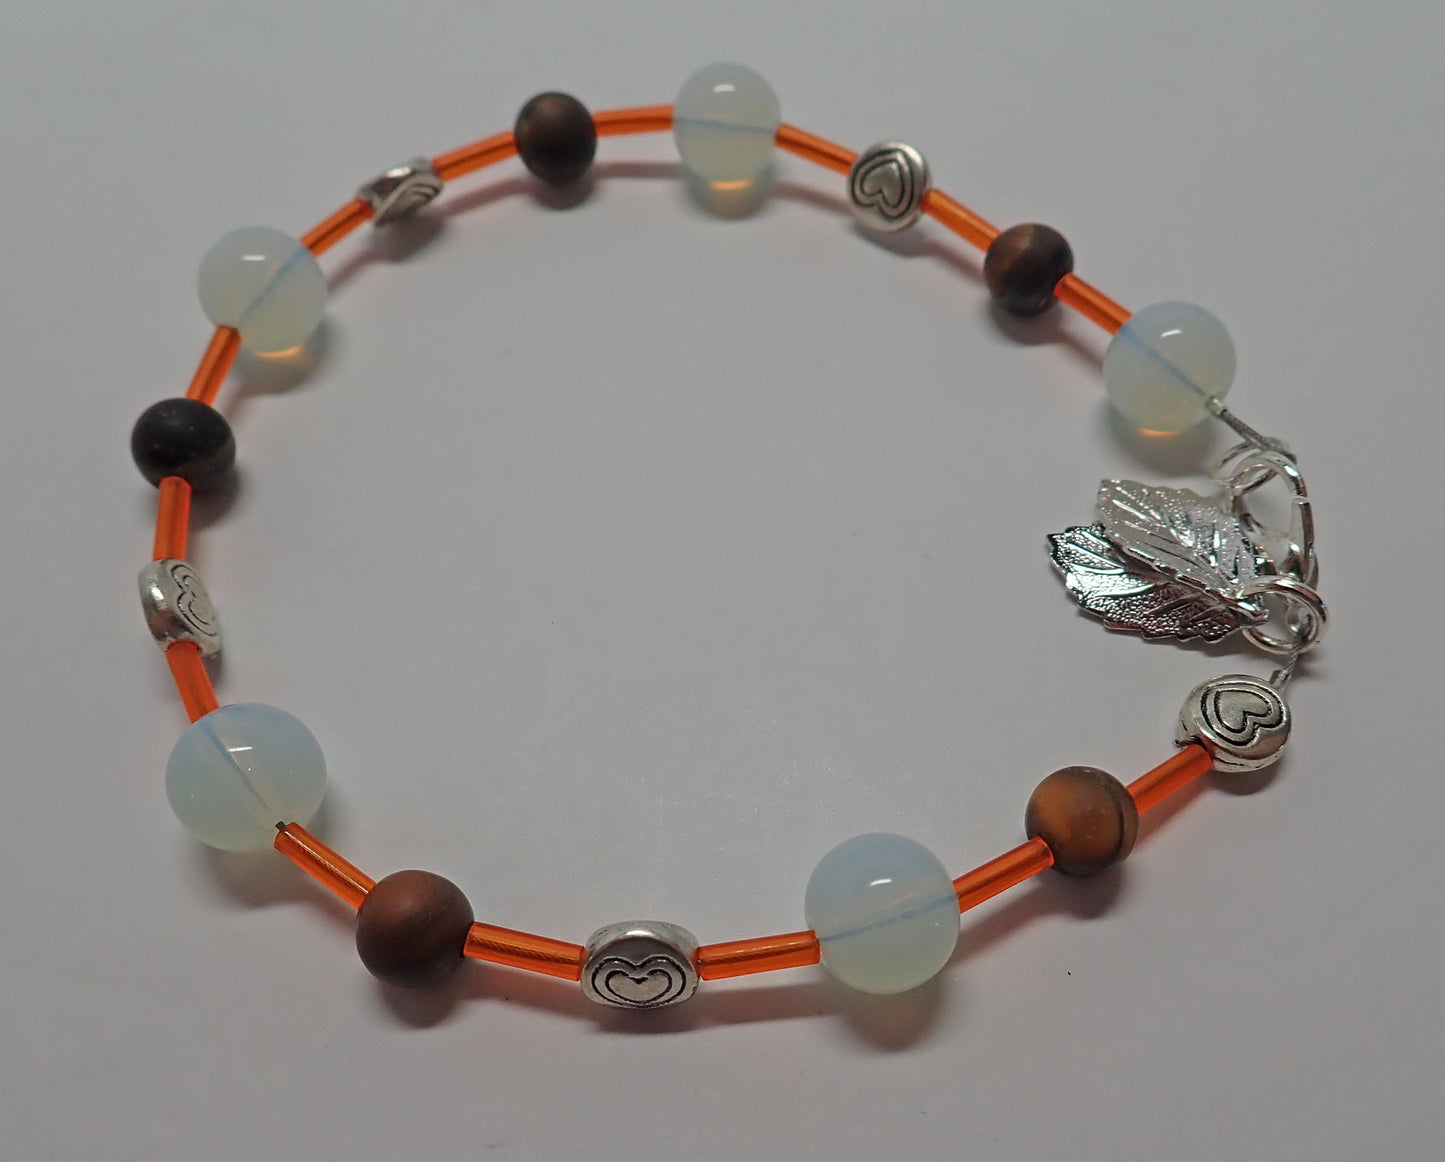 Jewelry, bracelet, glass beads, wooden beads, heart beads, leaf charms, orange, white, brown, gift